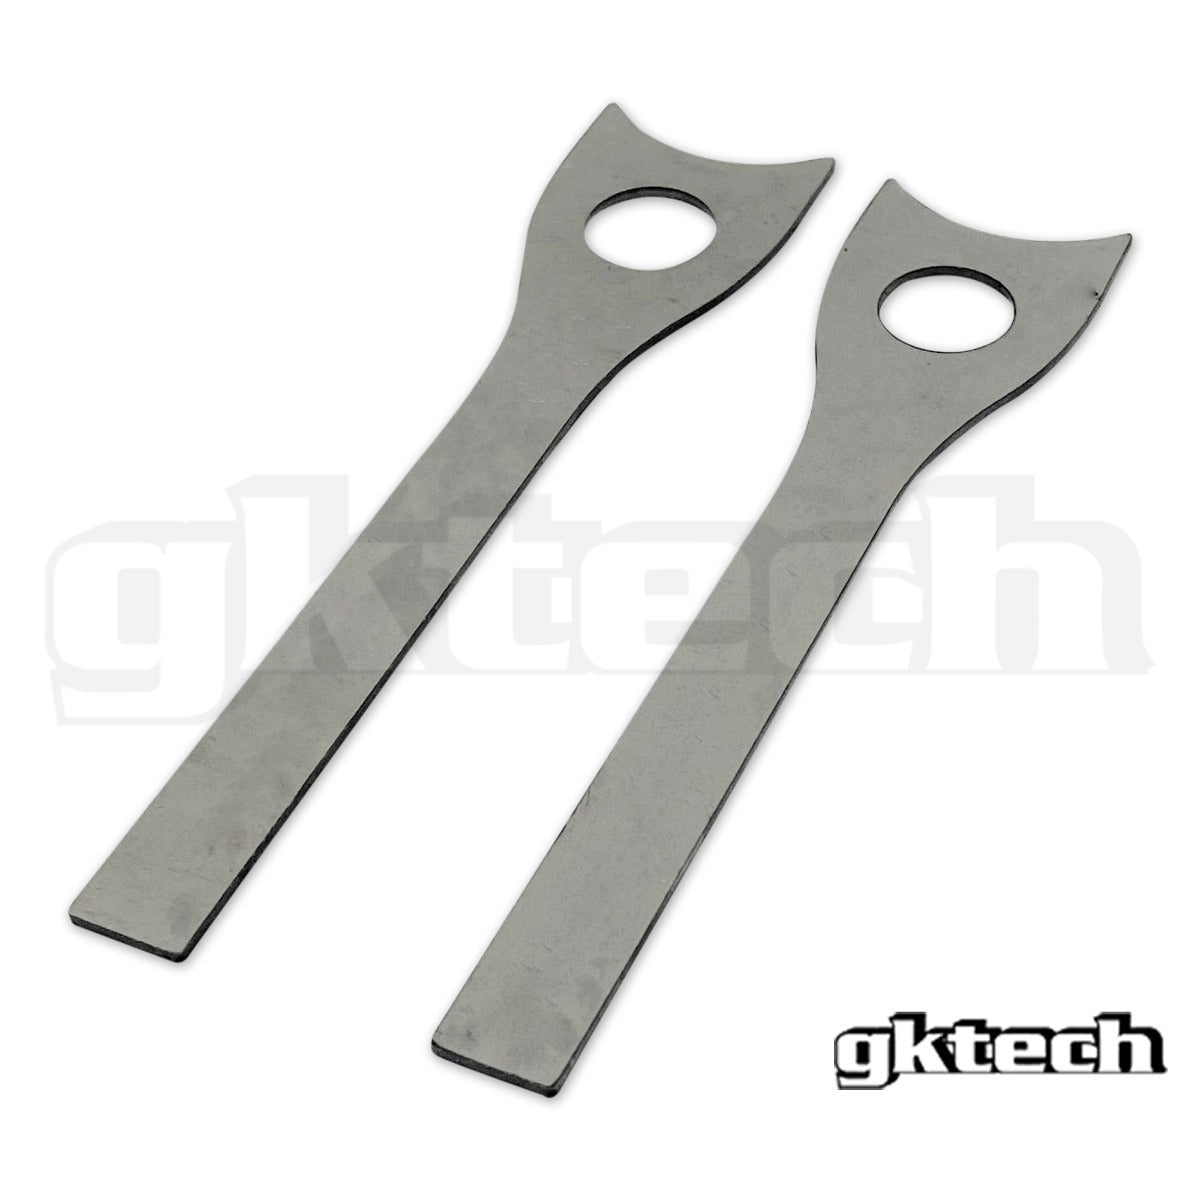 S13/180sx rear traction arm weld in reinforcement plates